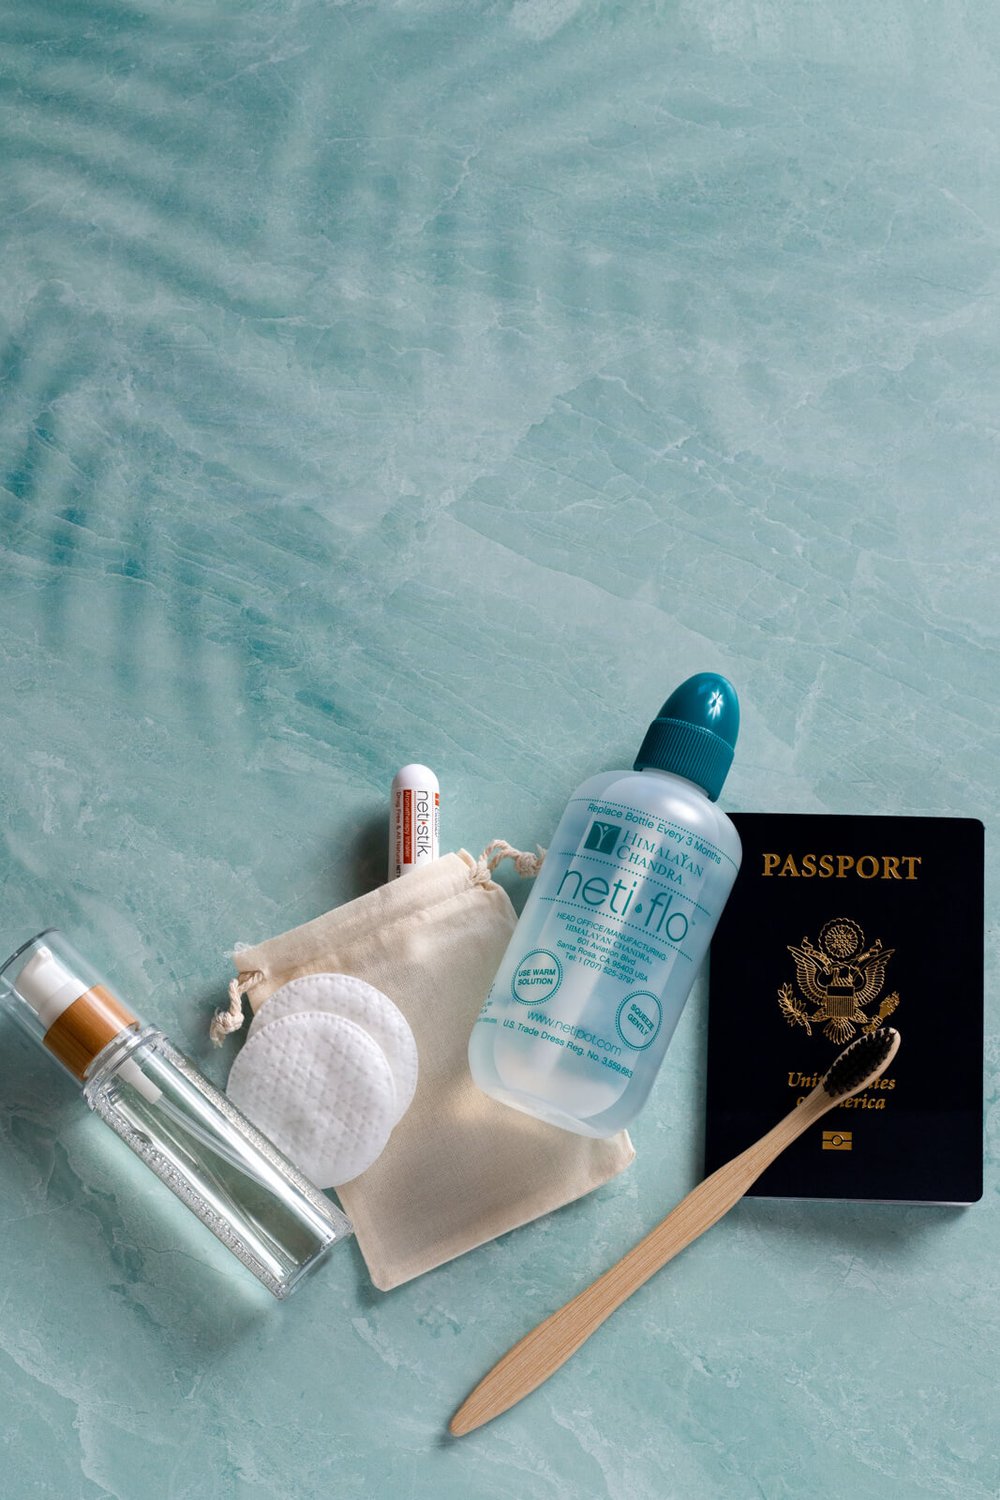 netiflo bottle with travel items and passport